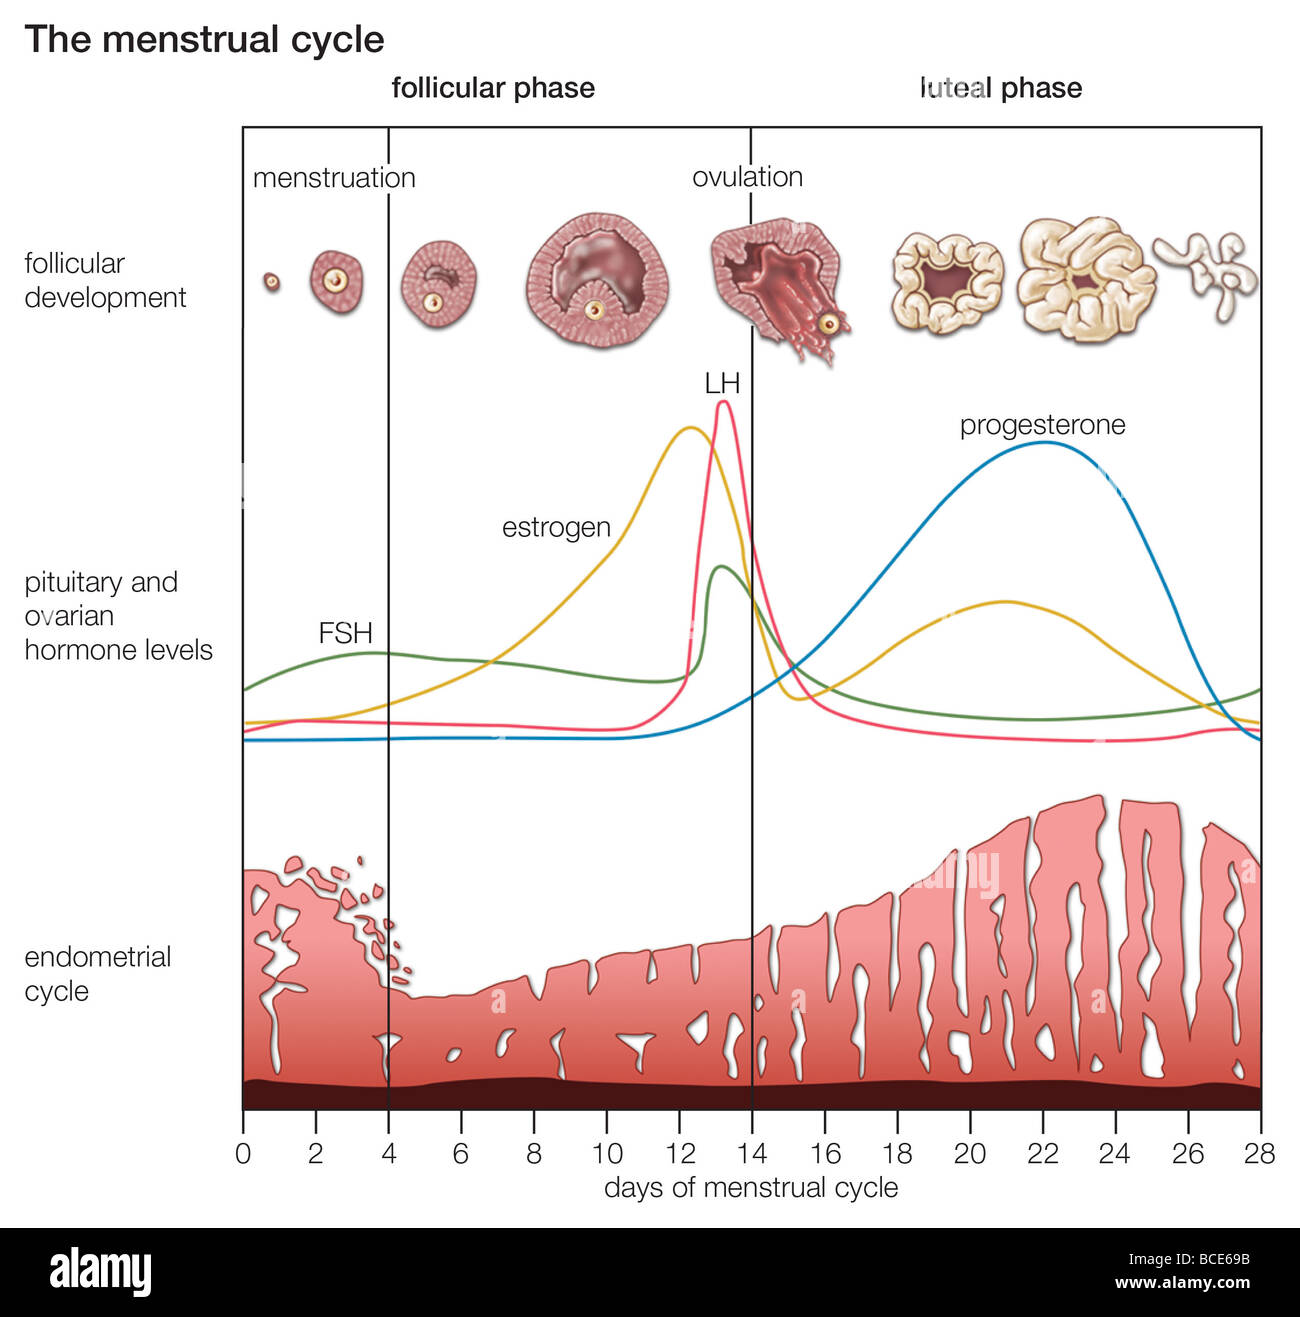 The cyclical changes that occur during the normal menstrual cycle in women. Stock Photo